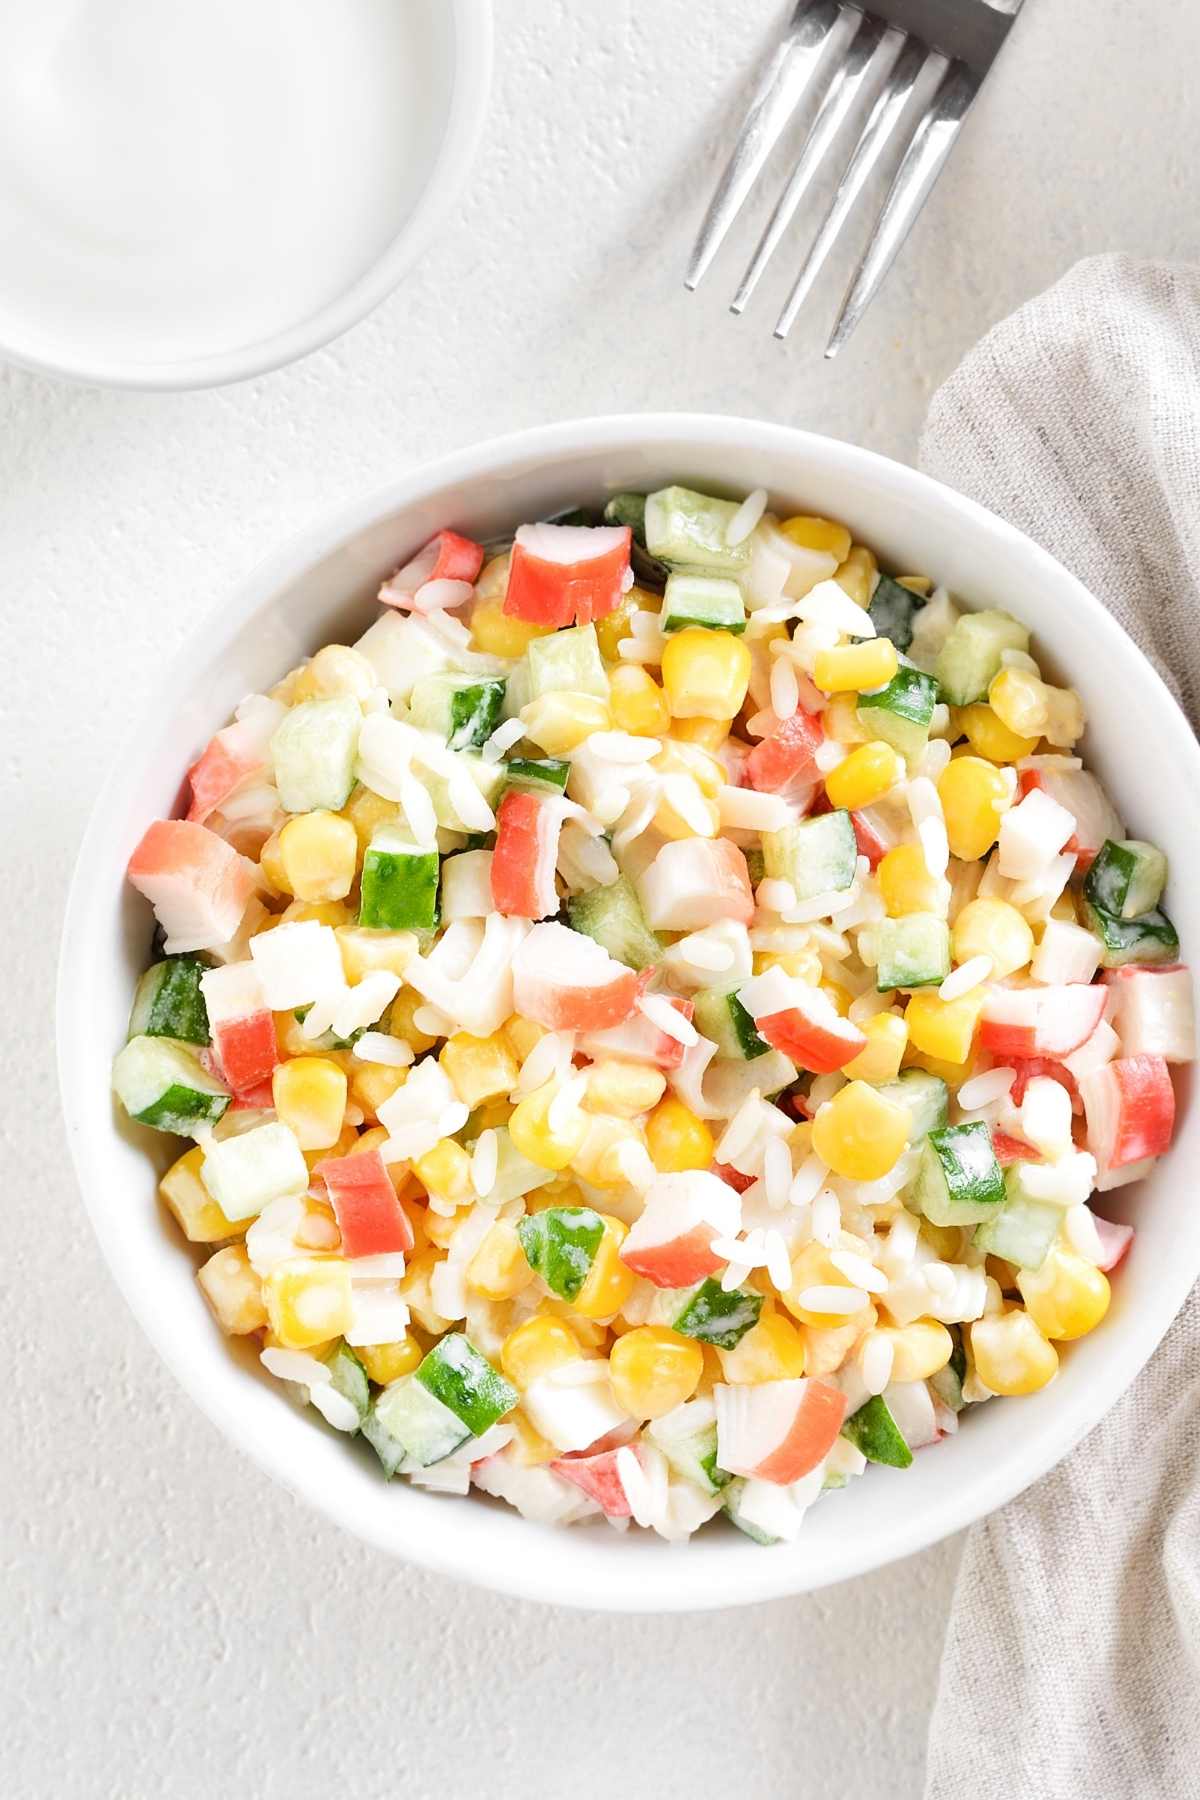 Surimi Salad is creamy, refreshing, and delicious. It’s so versatile and you can serve it as an appetizer, an entrée, or enjoy it as a snack when you’re craving something fresh and flavorful!